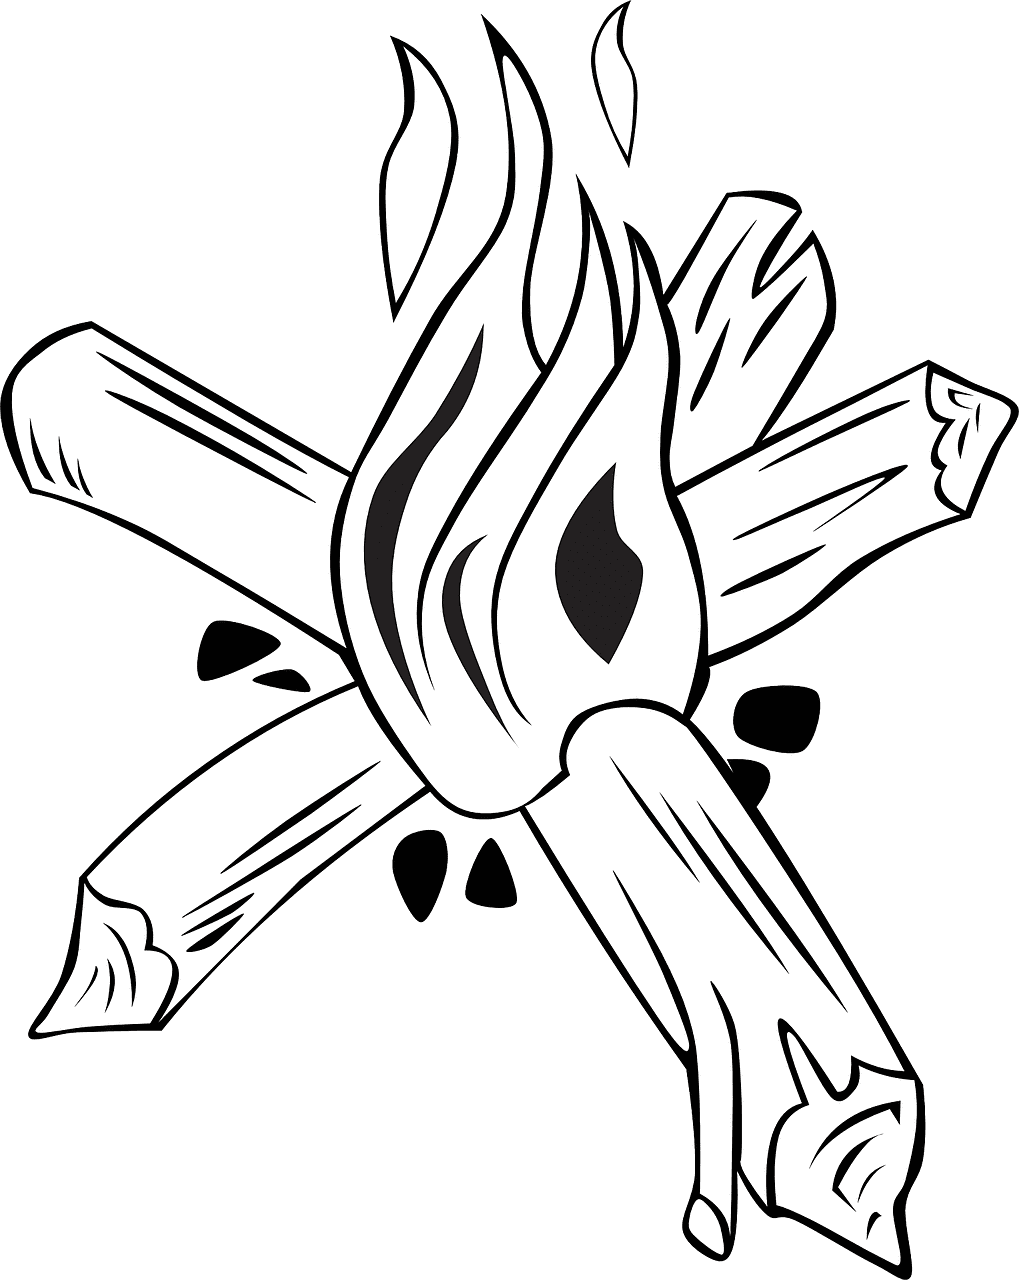 Campfires Fire Flame Coloring Pages